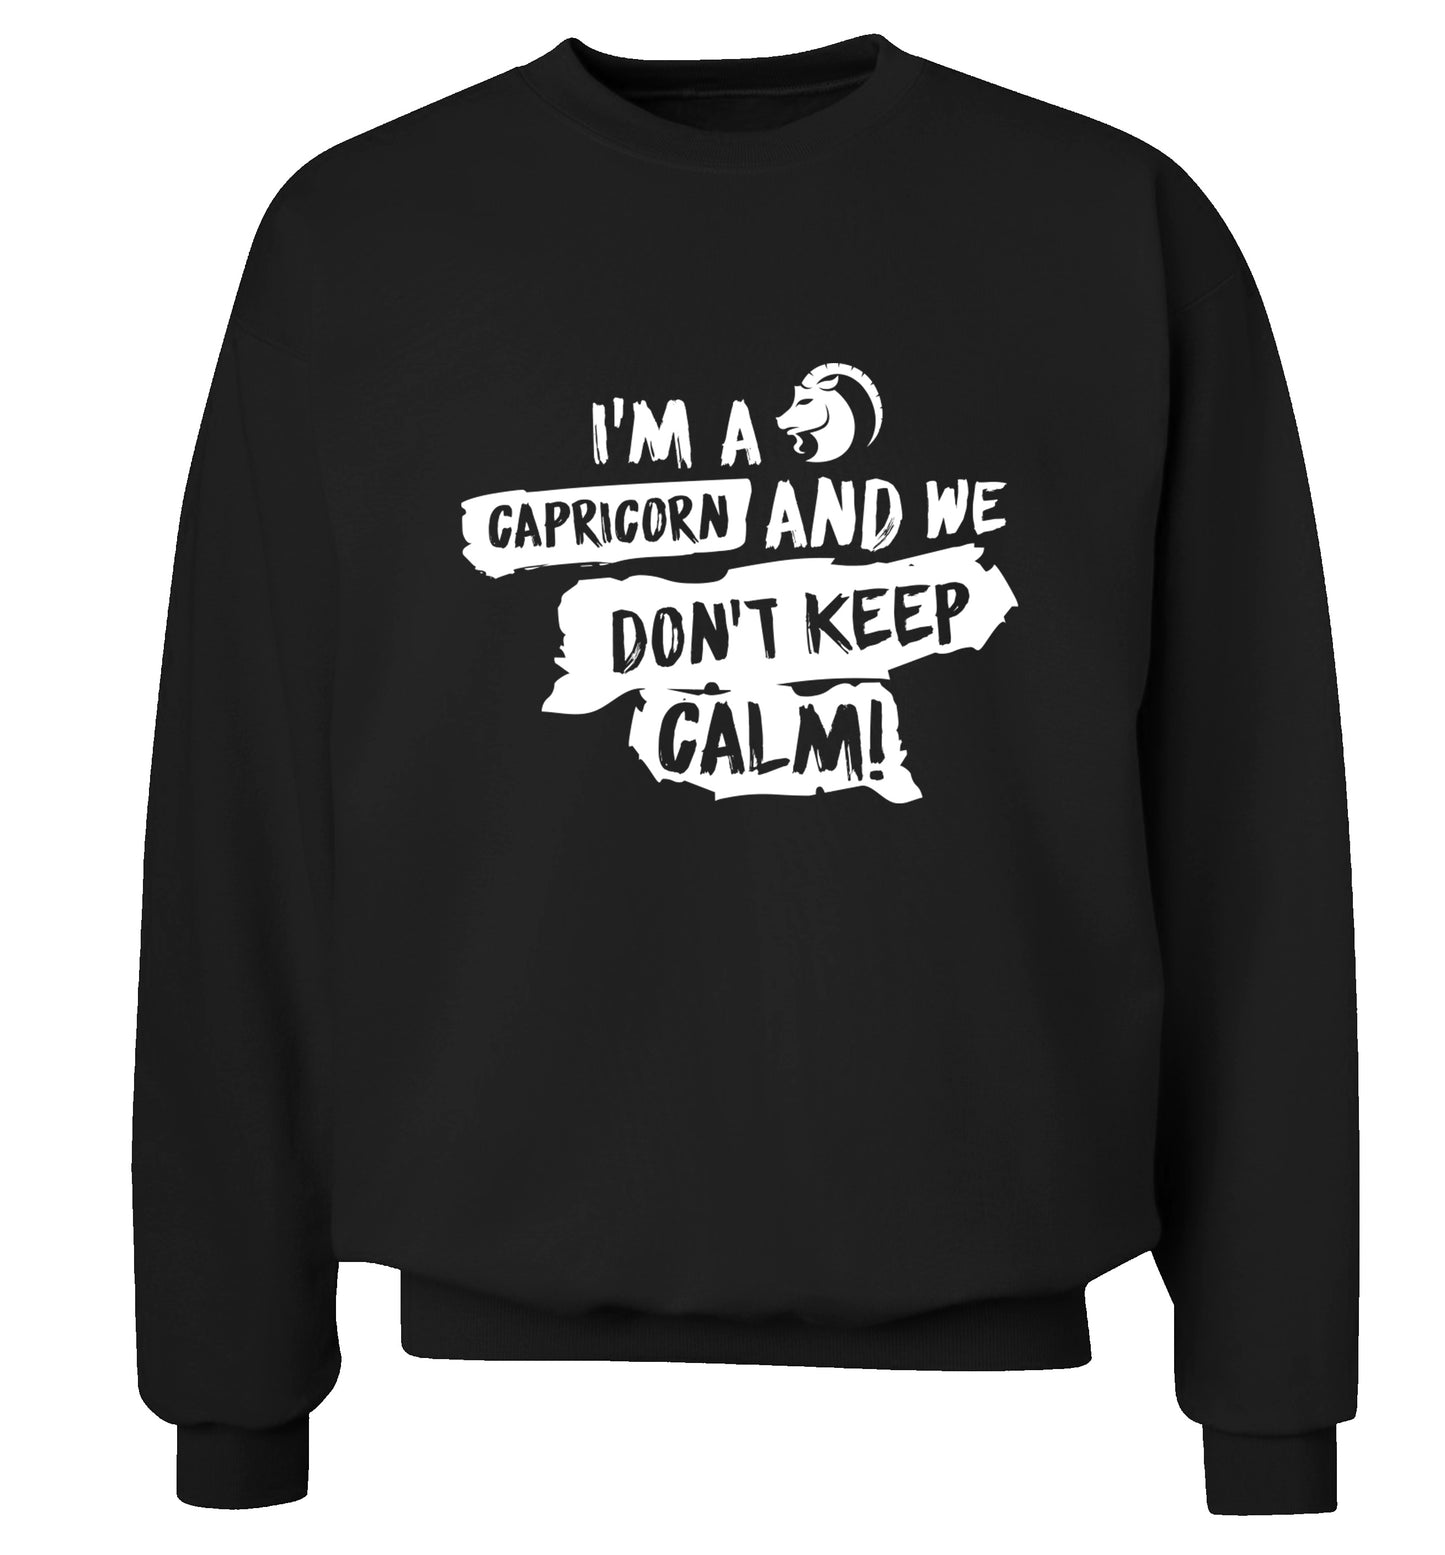 I'm a capricorn and we don't keep calm Adult's unisex black Sweater 2XL